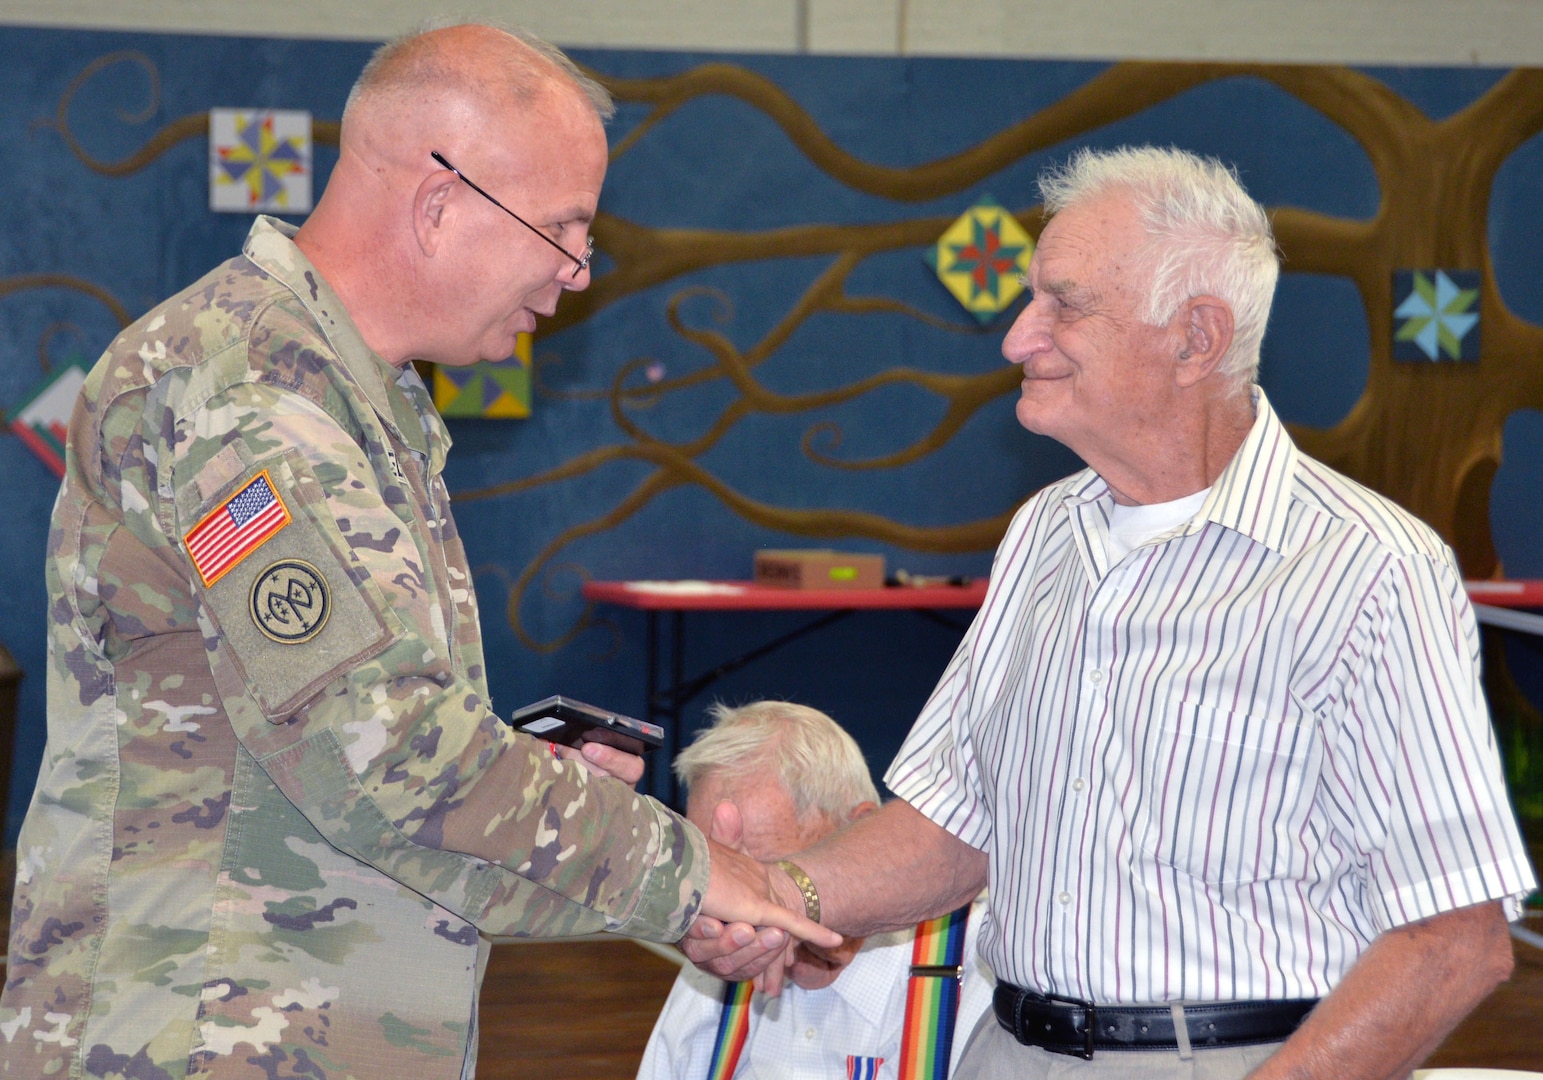 Maj. Gen. Ray Shields, the adjutant general of New York, presents a military challenge coin to Air Force Korean War veteran Merton W. Houghton during an awards ceremony at the former New York State Armory in Hoosick Falls, N.Y., on Aug. 28, 2019. Shields honored 10  local veterans with New York state awards recognizing their military service during the event.